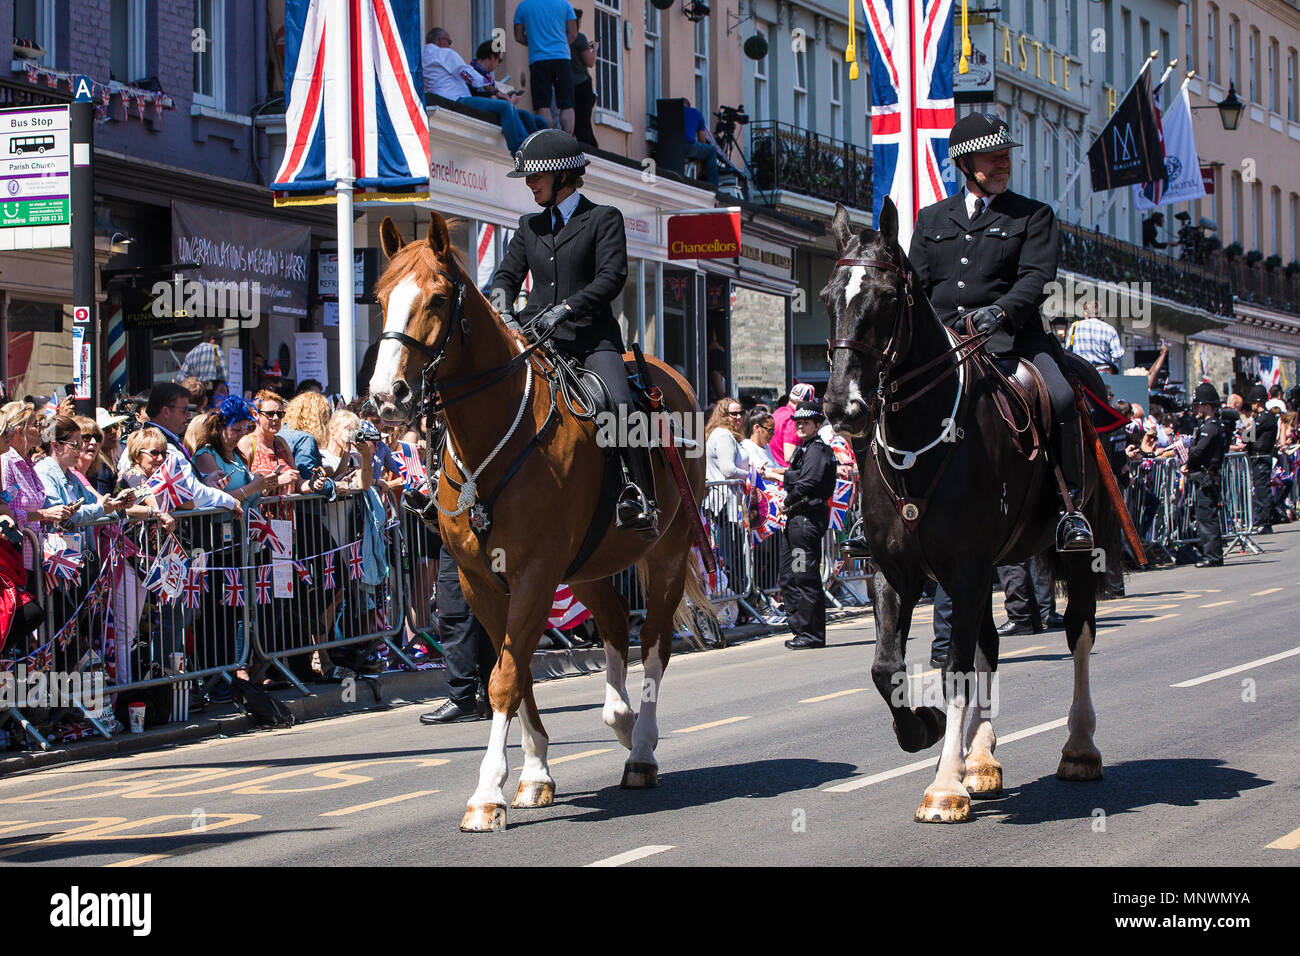 Policing the Royal Wedding of Prince Harry to Meghan Markle took many forms from the traditional Bobby on the beat and Mounted Officers to the Heavily Armed Firearms officers carrying Automatic weapons who were very much in evidence. Credit: David Betteridge/Alamy Live News Stock Photo